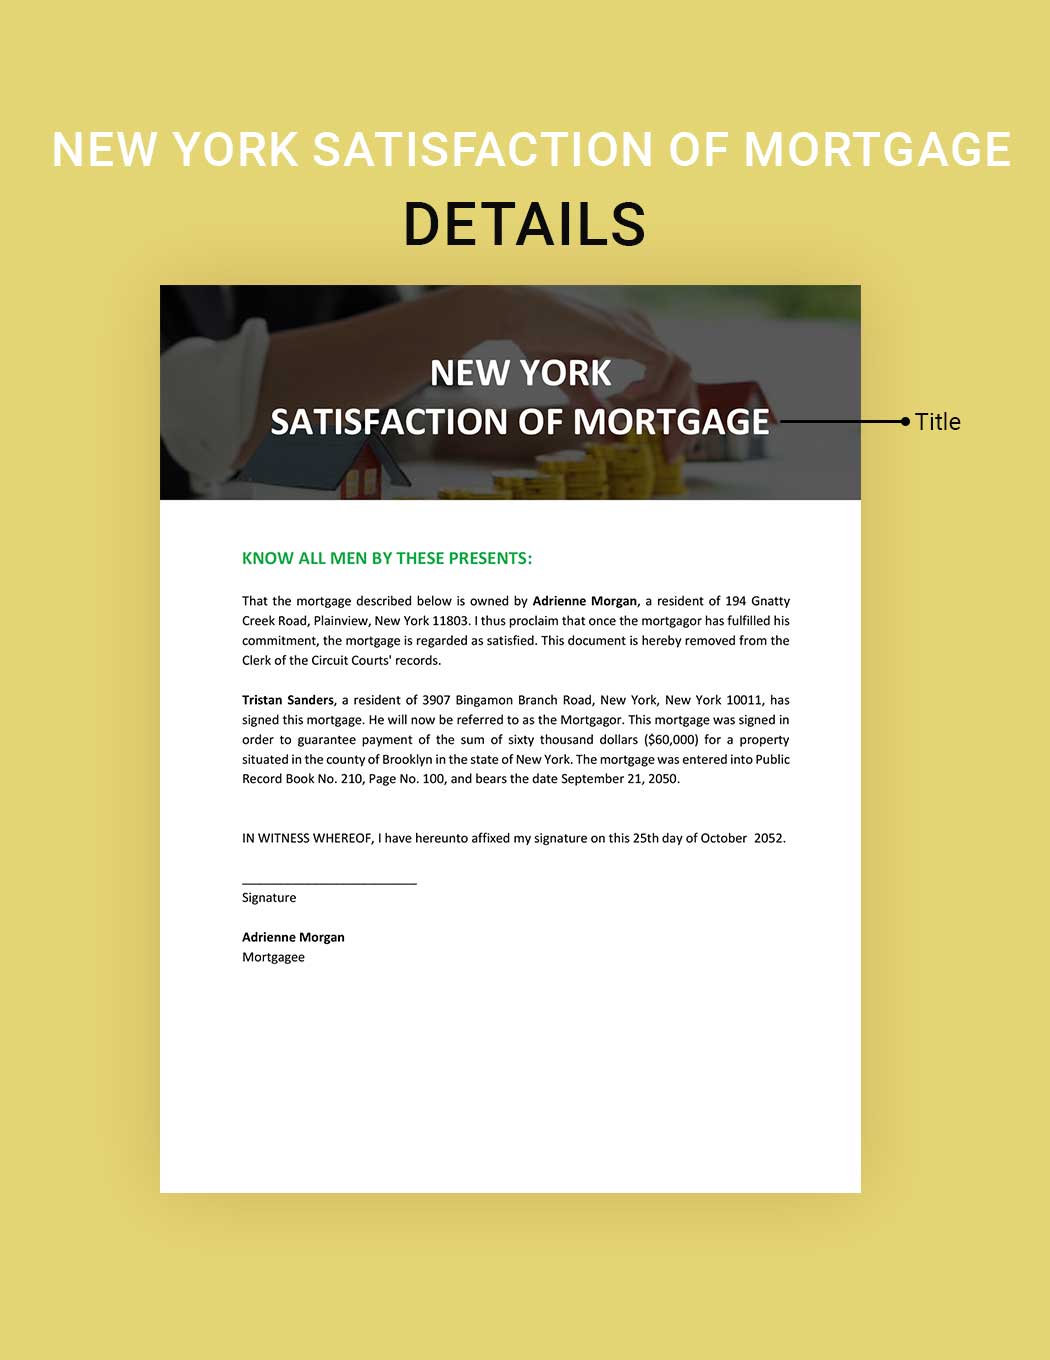 New York Satisfaction Of Mortgage Template